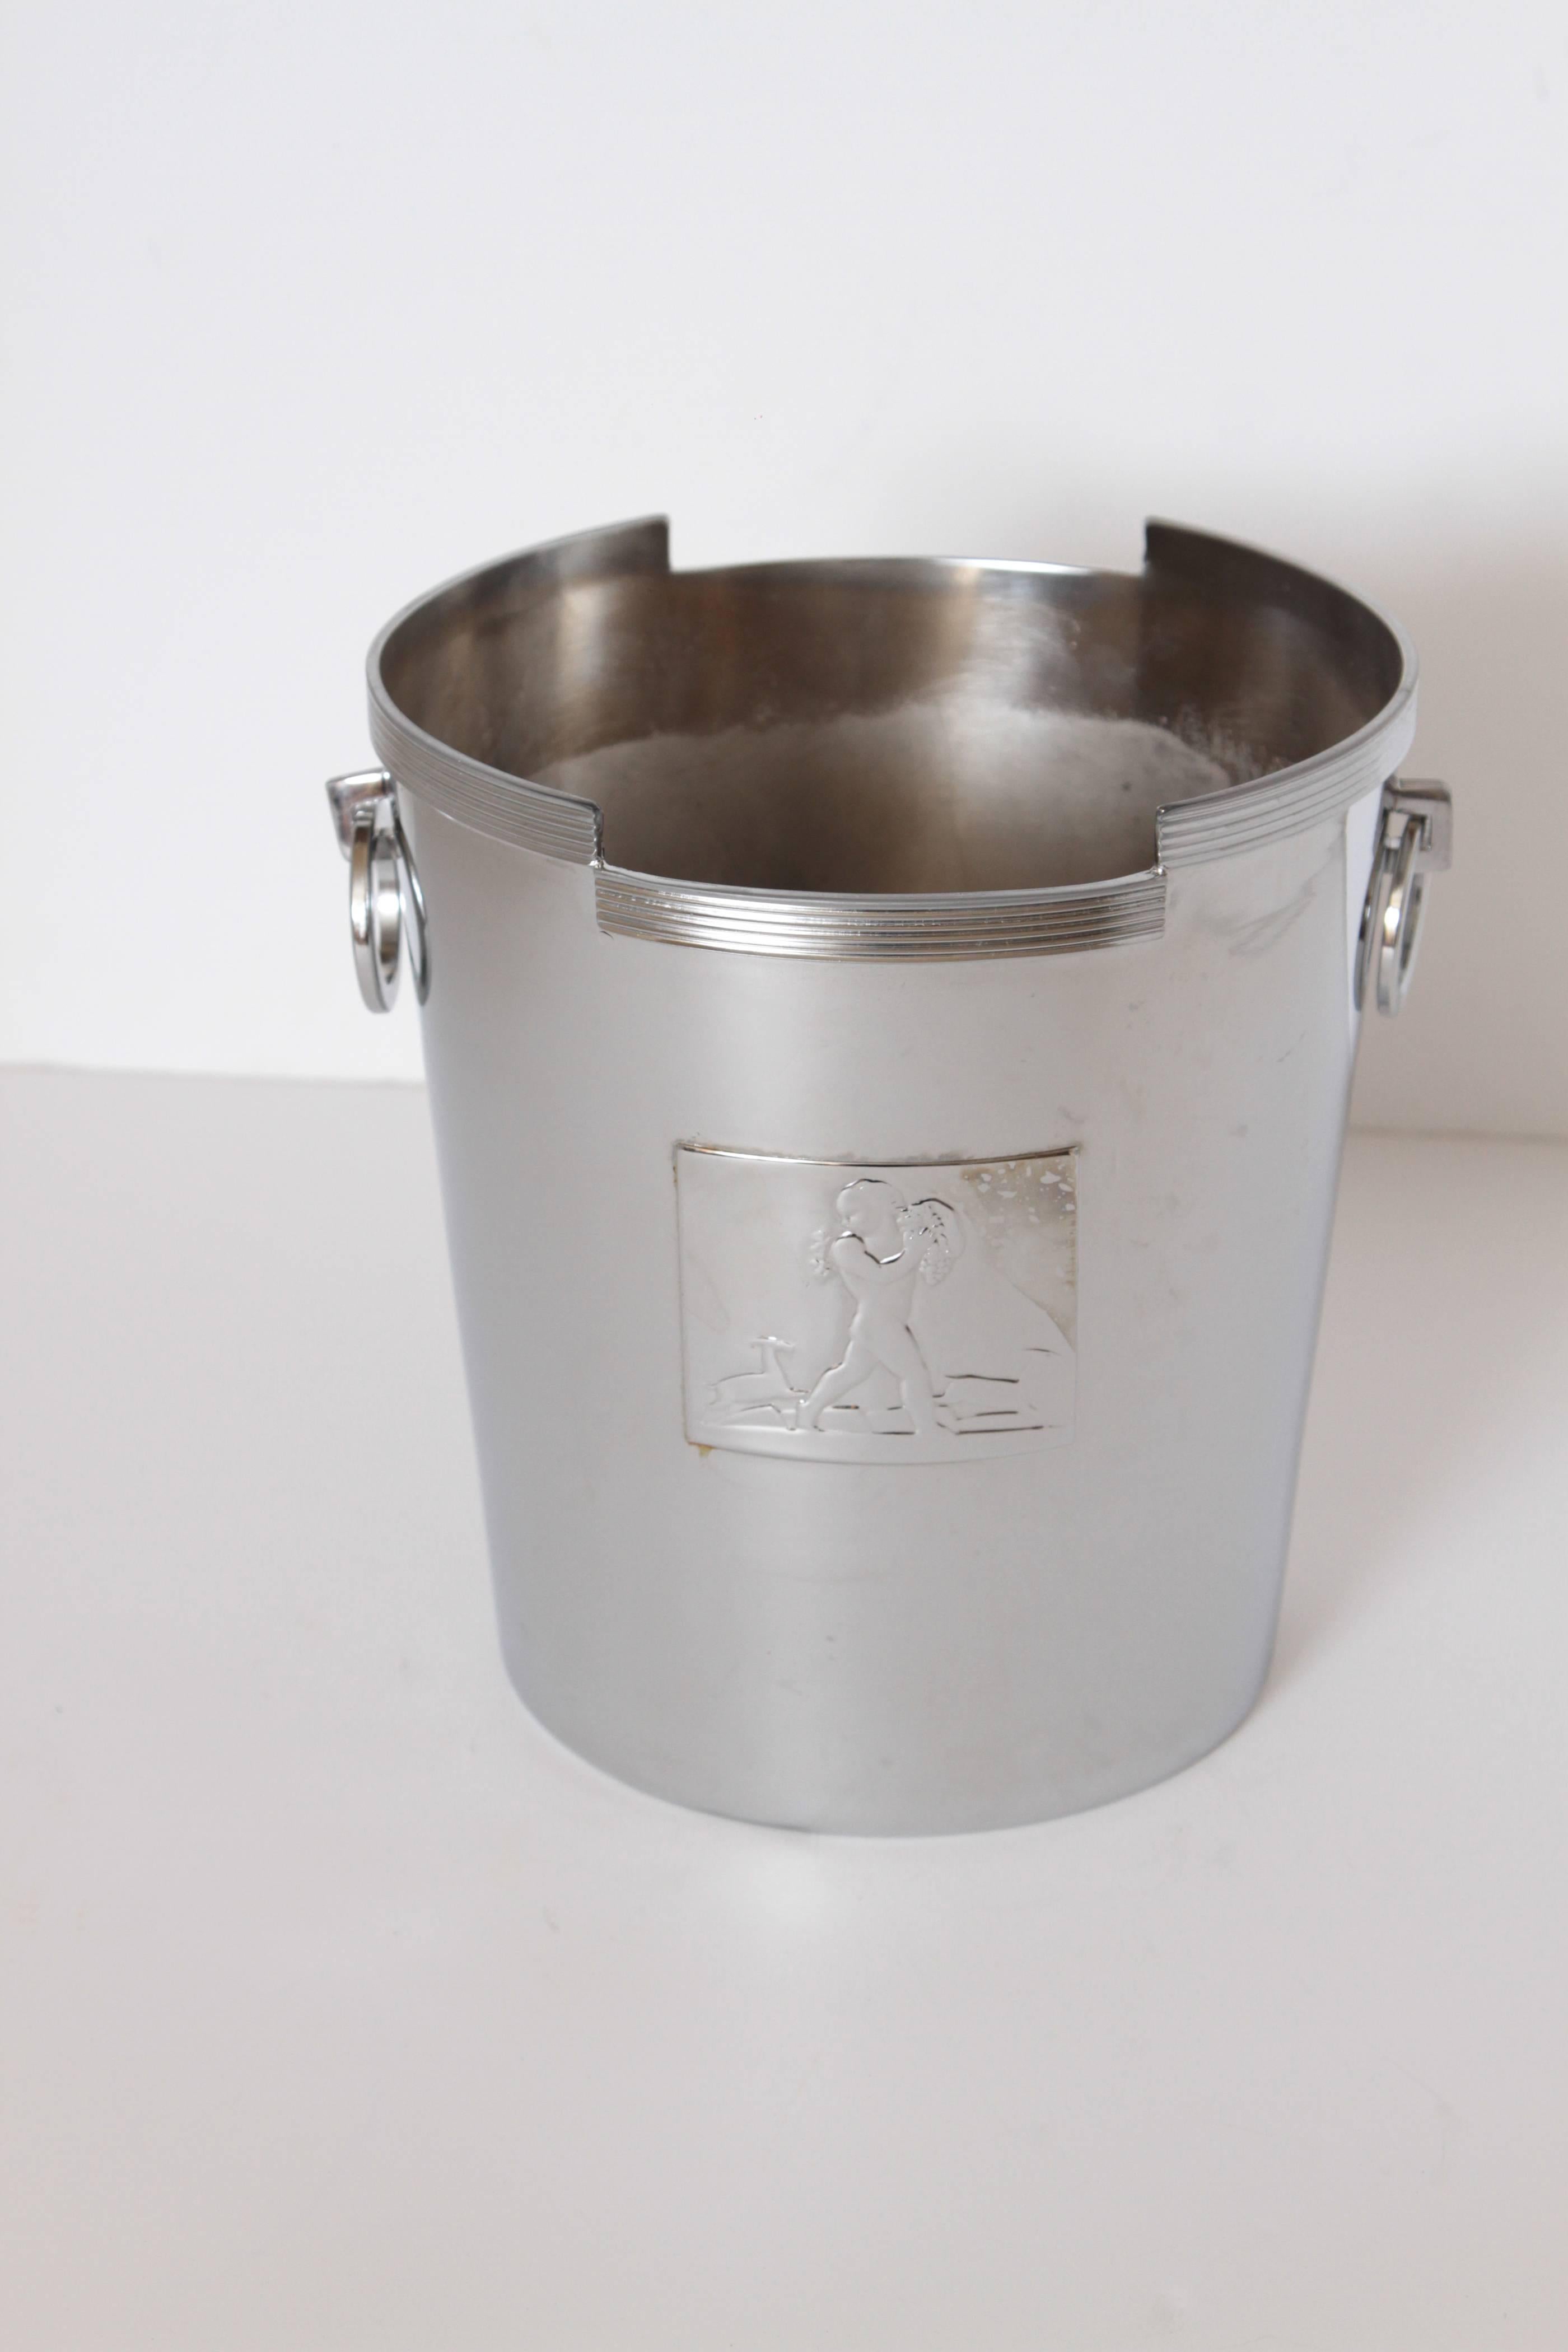 Machine Age Art Deco Rockwell Kent Chase Bacchus handled wine cooler / champagne bucket.   PRICE REDUCED

Bacchus high-relief panel designed by Kent, with initials R K visible. 
Incised line ornamentation, in the manner of Lurelle Guild, who also